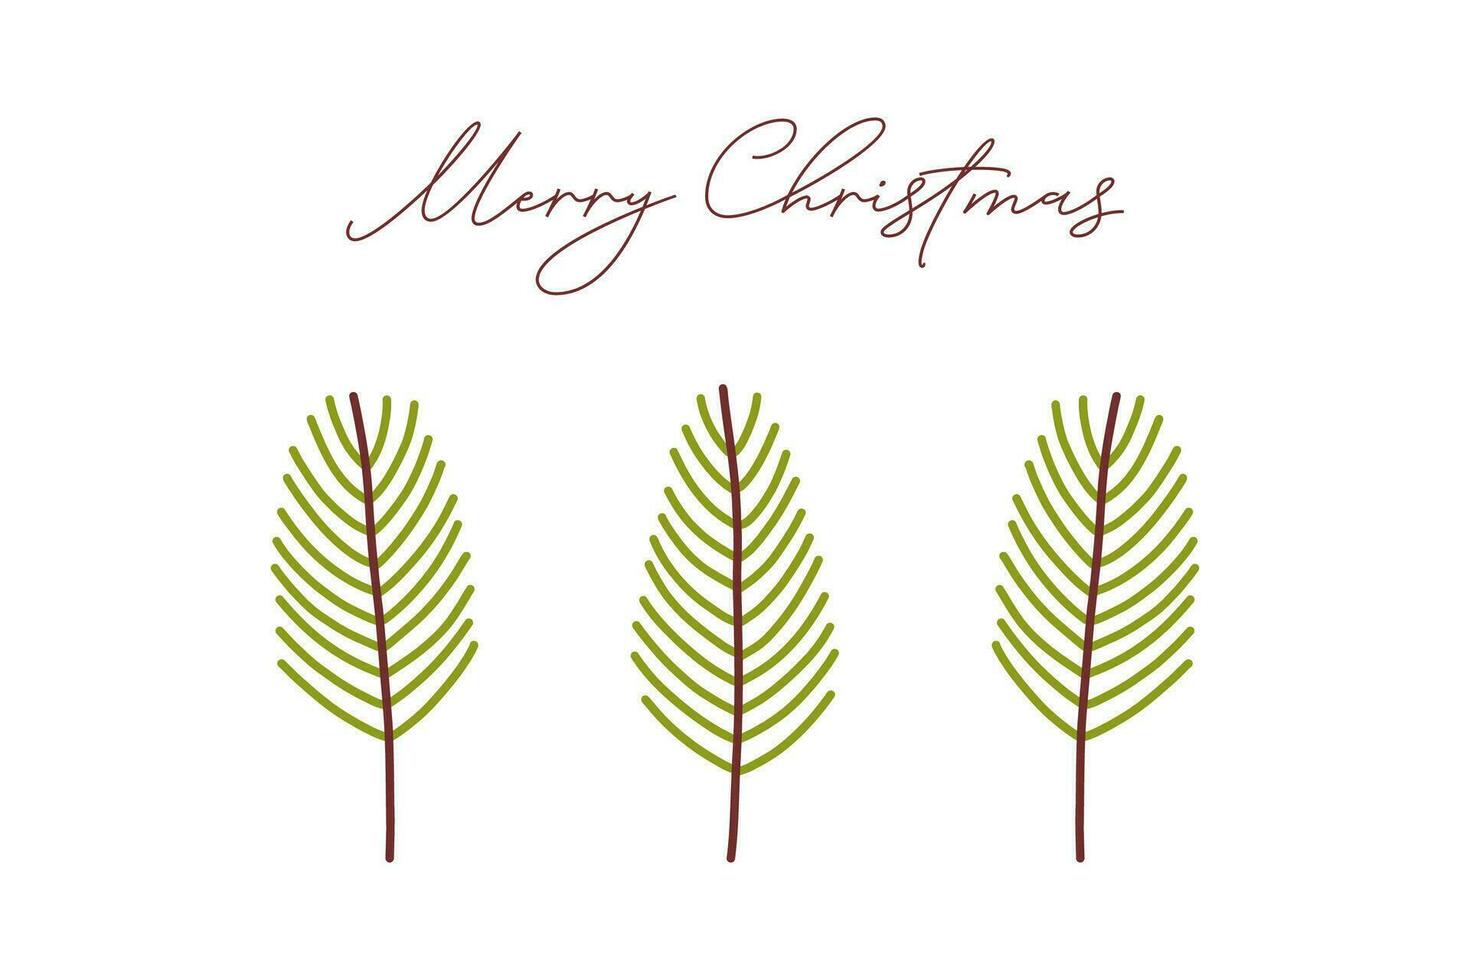 Merry Christmas card with fir branches and lettering. Hand drawn vector illustration